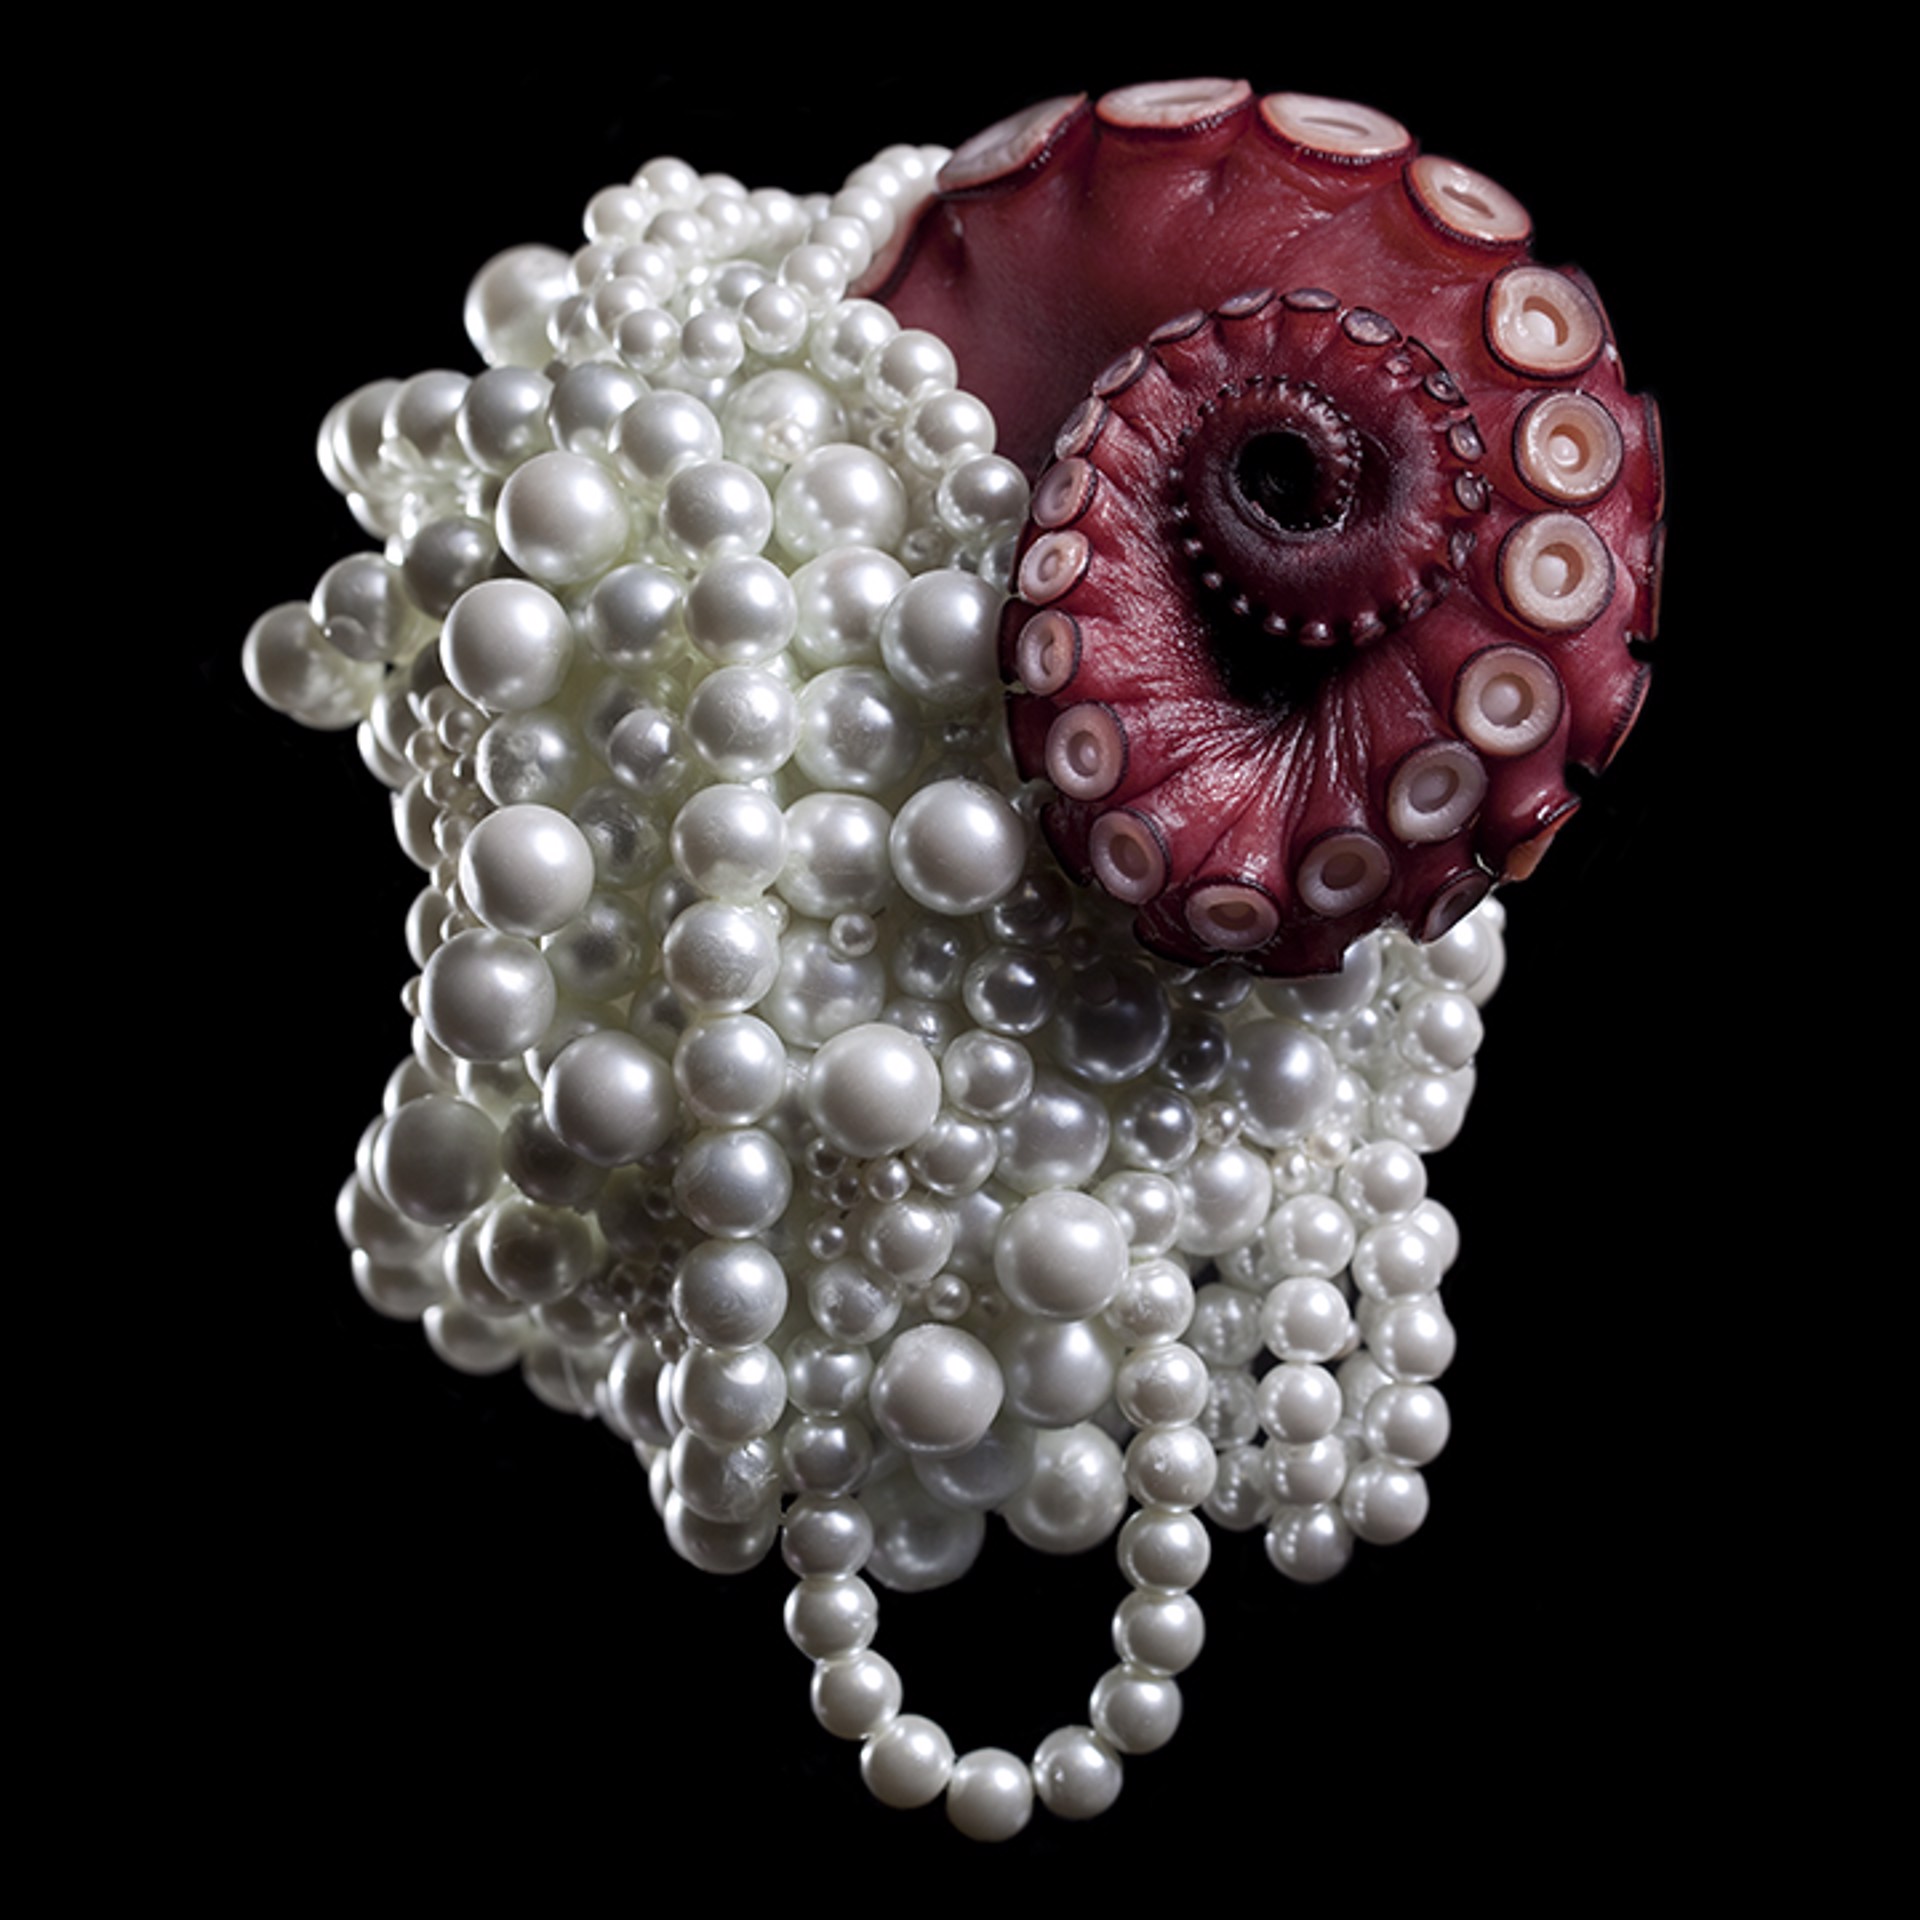 Octopus Pearls by Max Shuster